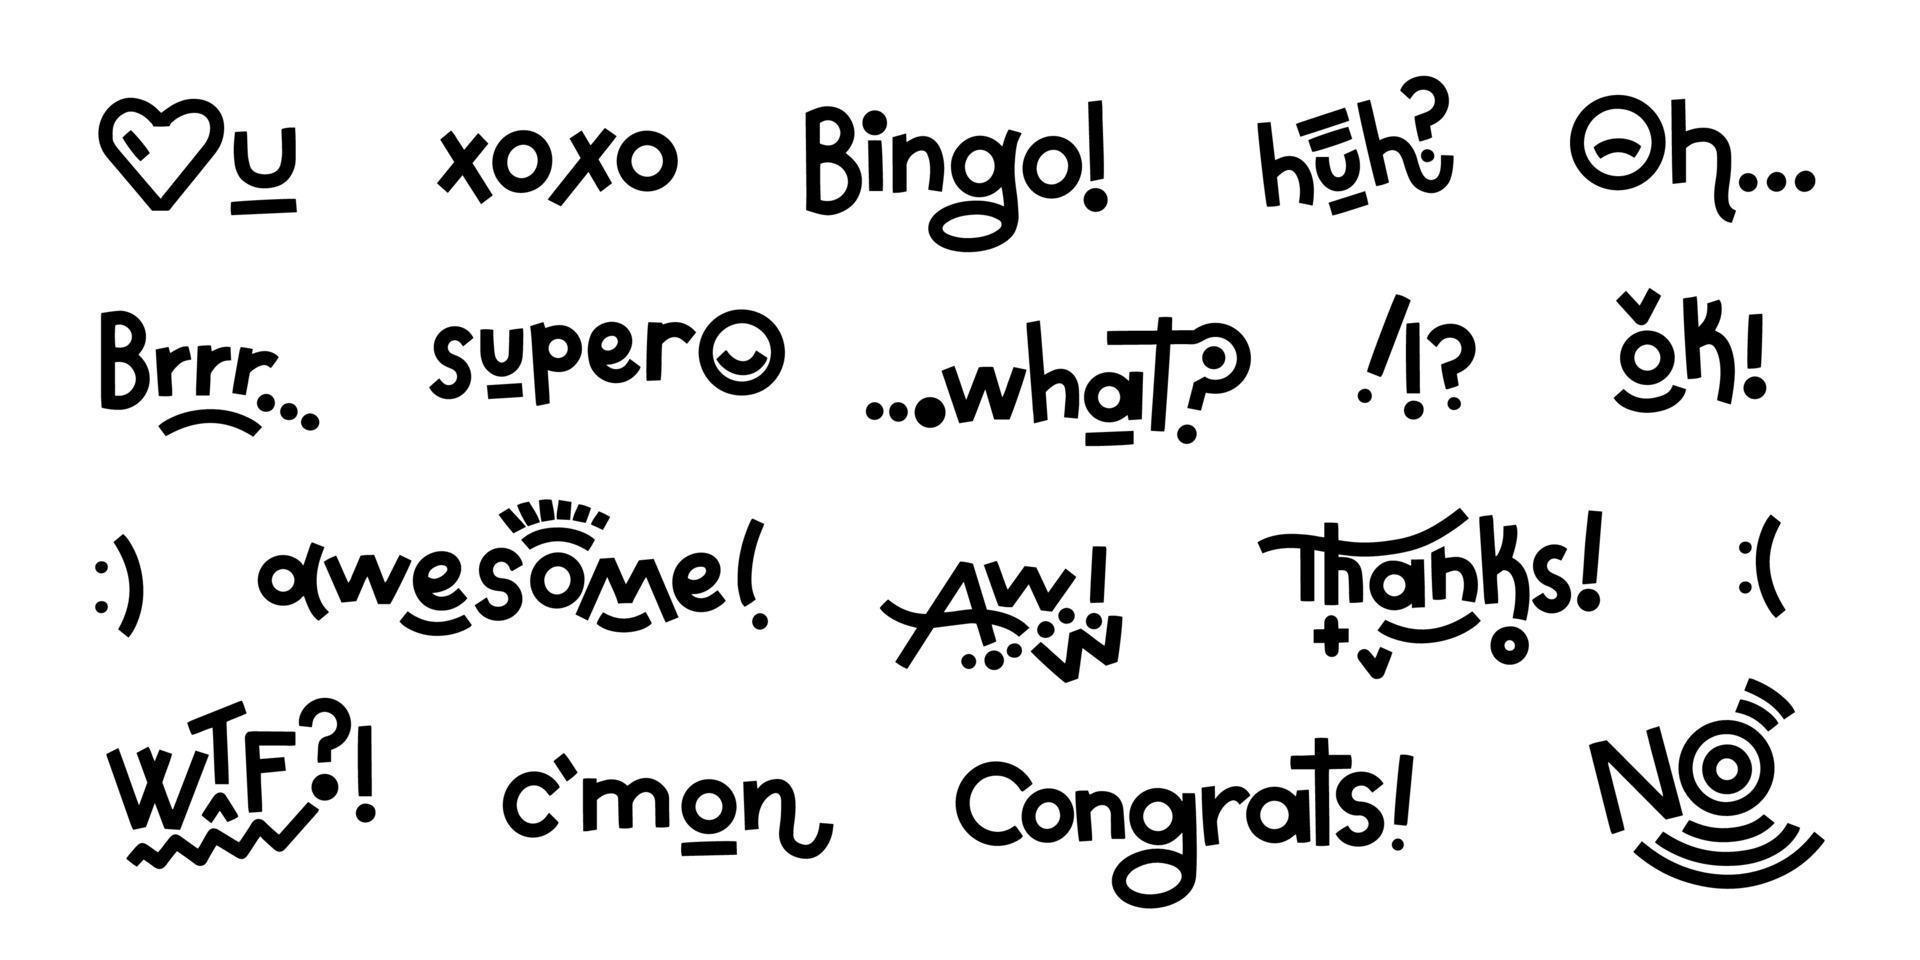 Exclamations oh, huh, aww, wtf and other words such as congrats, awesome, super as a collection. Modern bold lettering with geometric elements. Vector funny words for stickers, posters, social media.